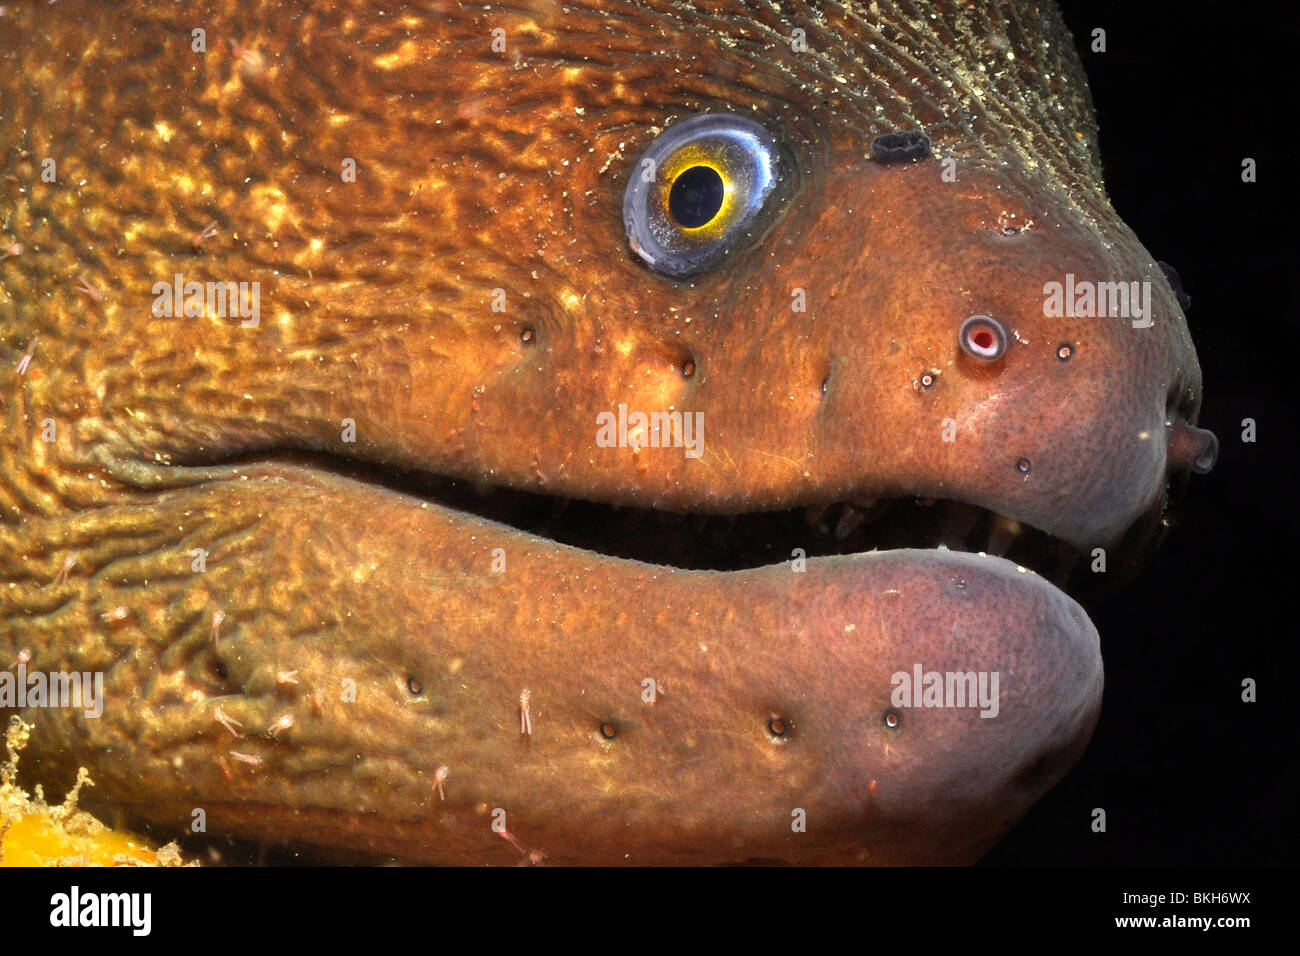 Moray eel, ( Gymnothorax mordax) Shaw's Cove, California. Note the attached parasites along the face and jaw of the eel. Stock Photo